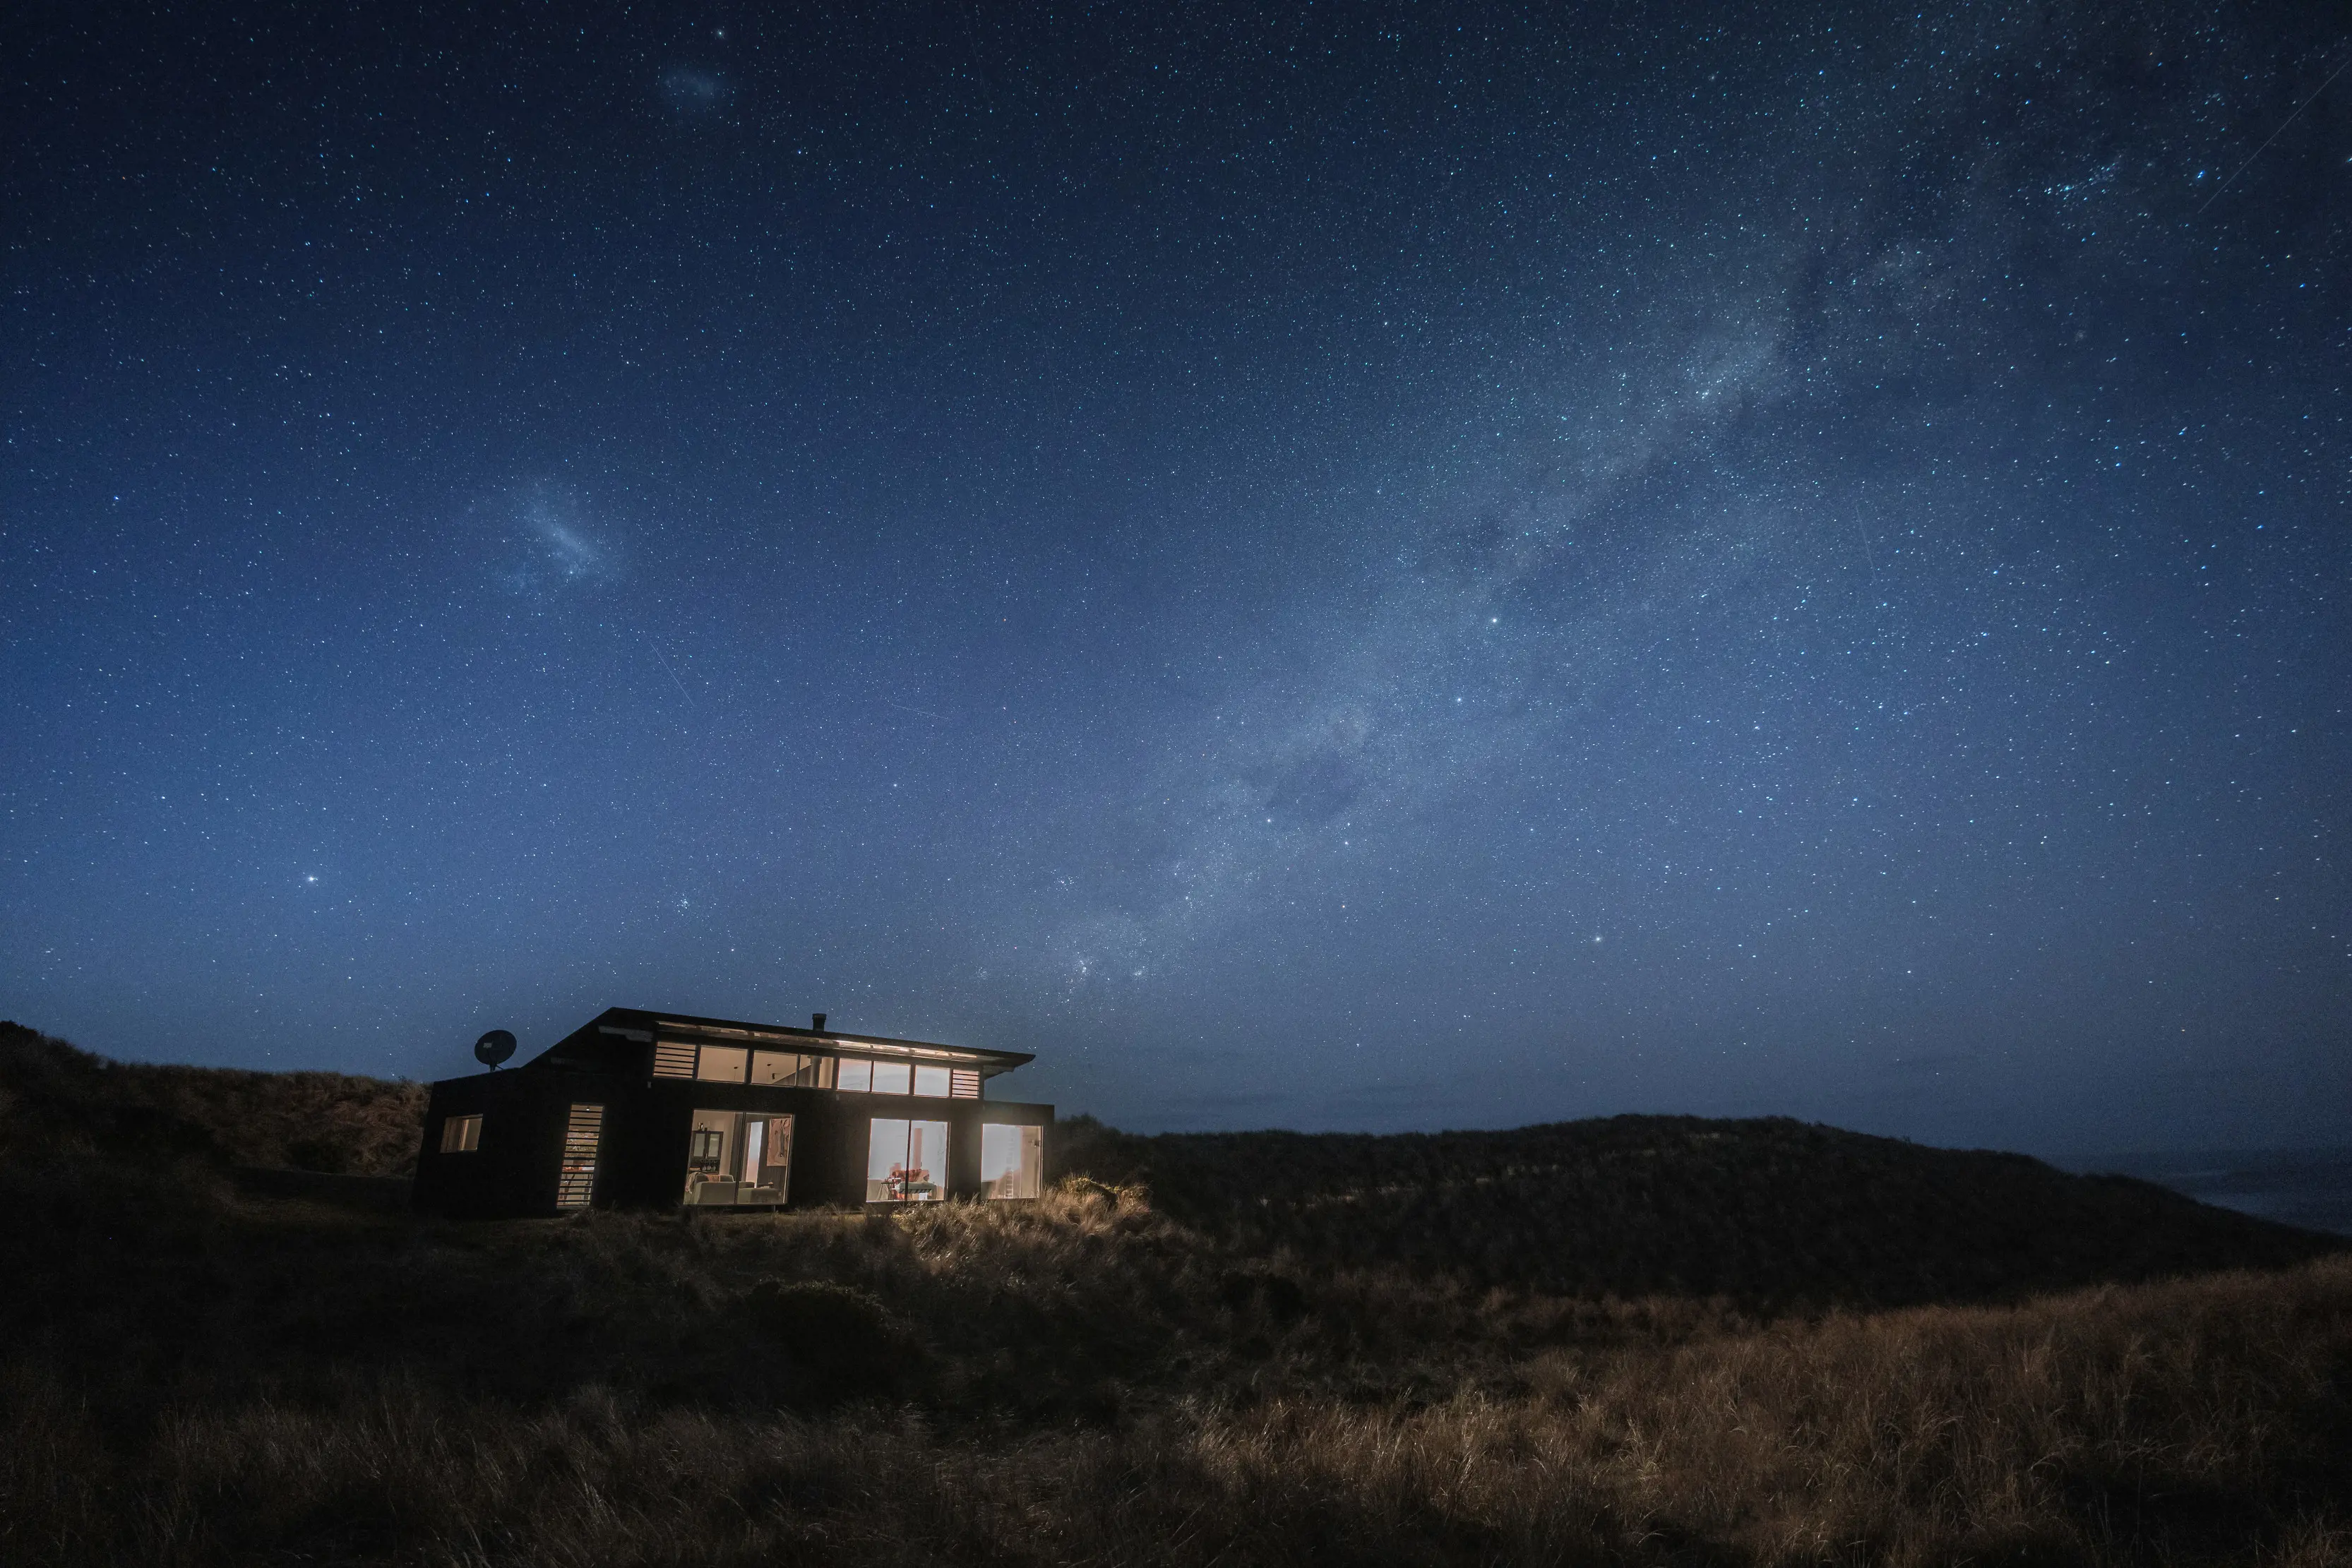 Landscape image of Kittawa Lodge at night with the sky full of stars.